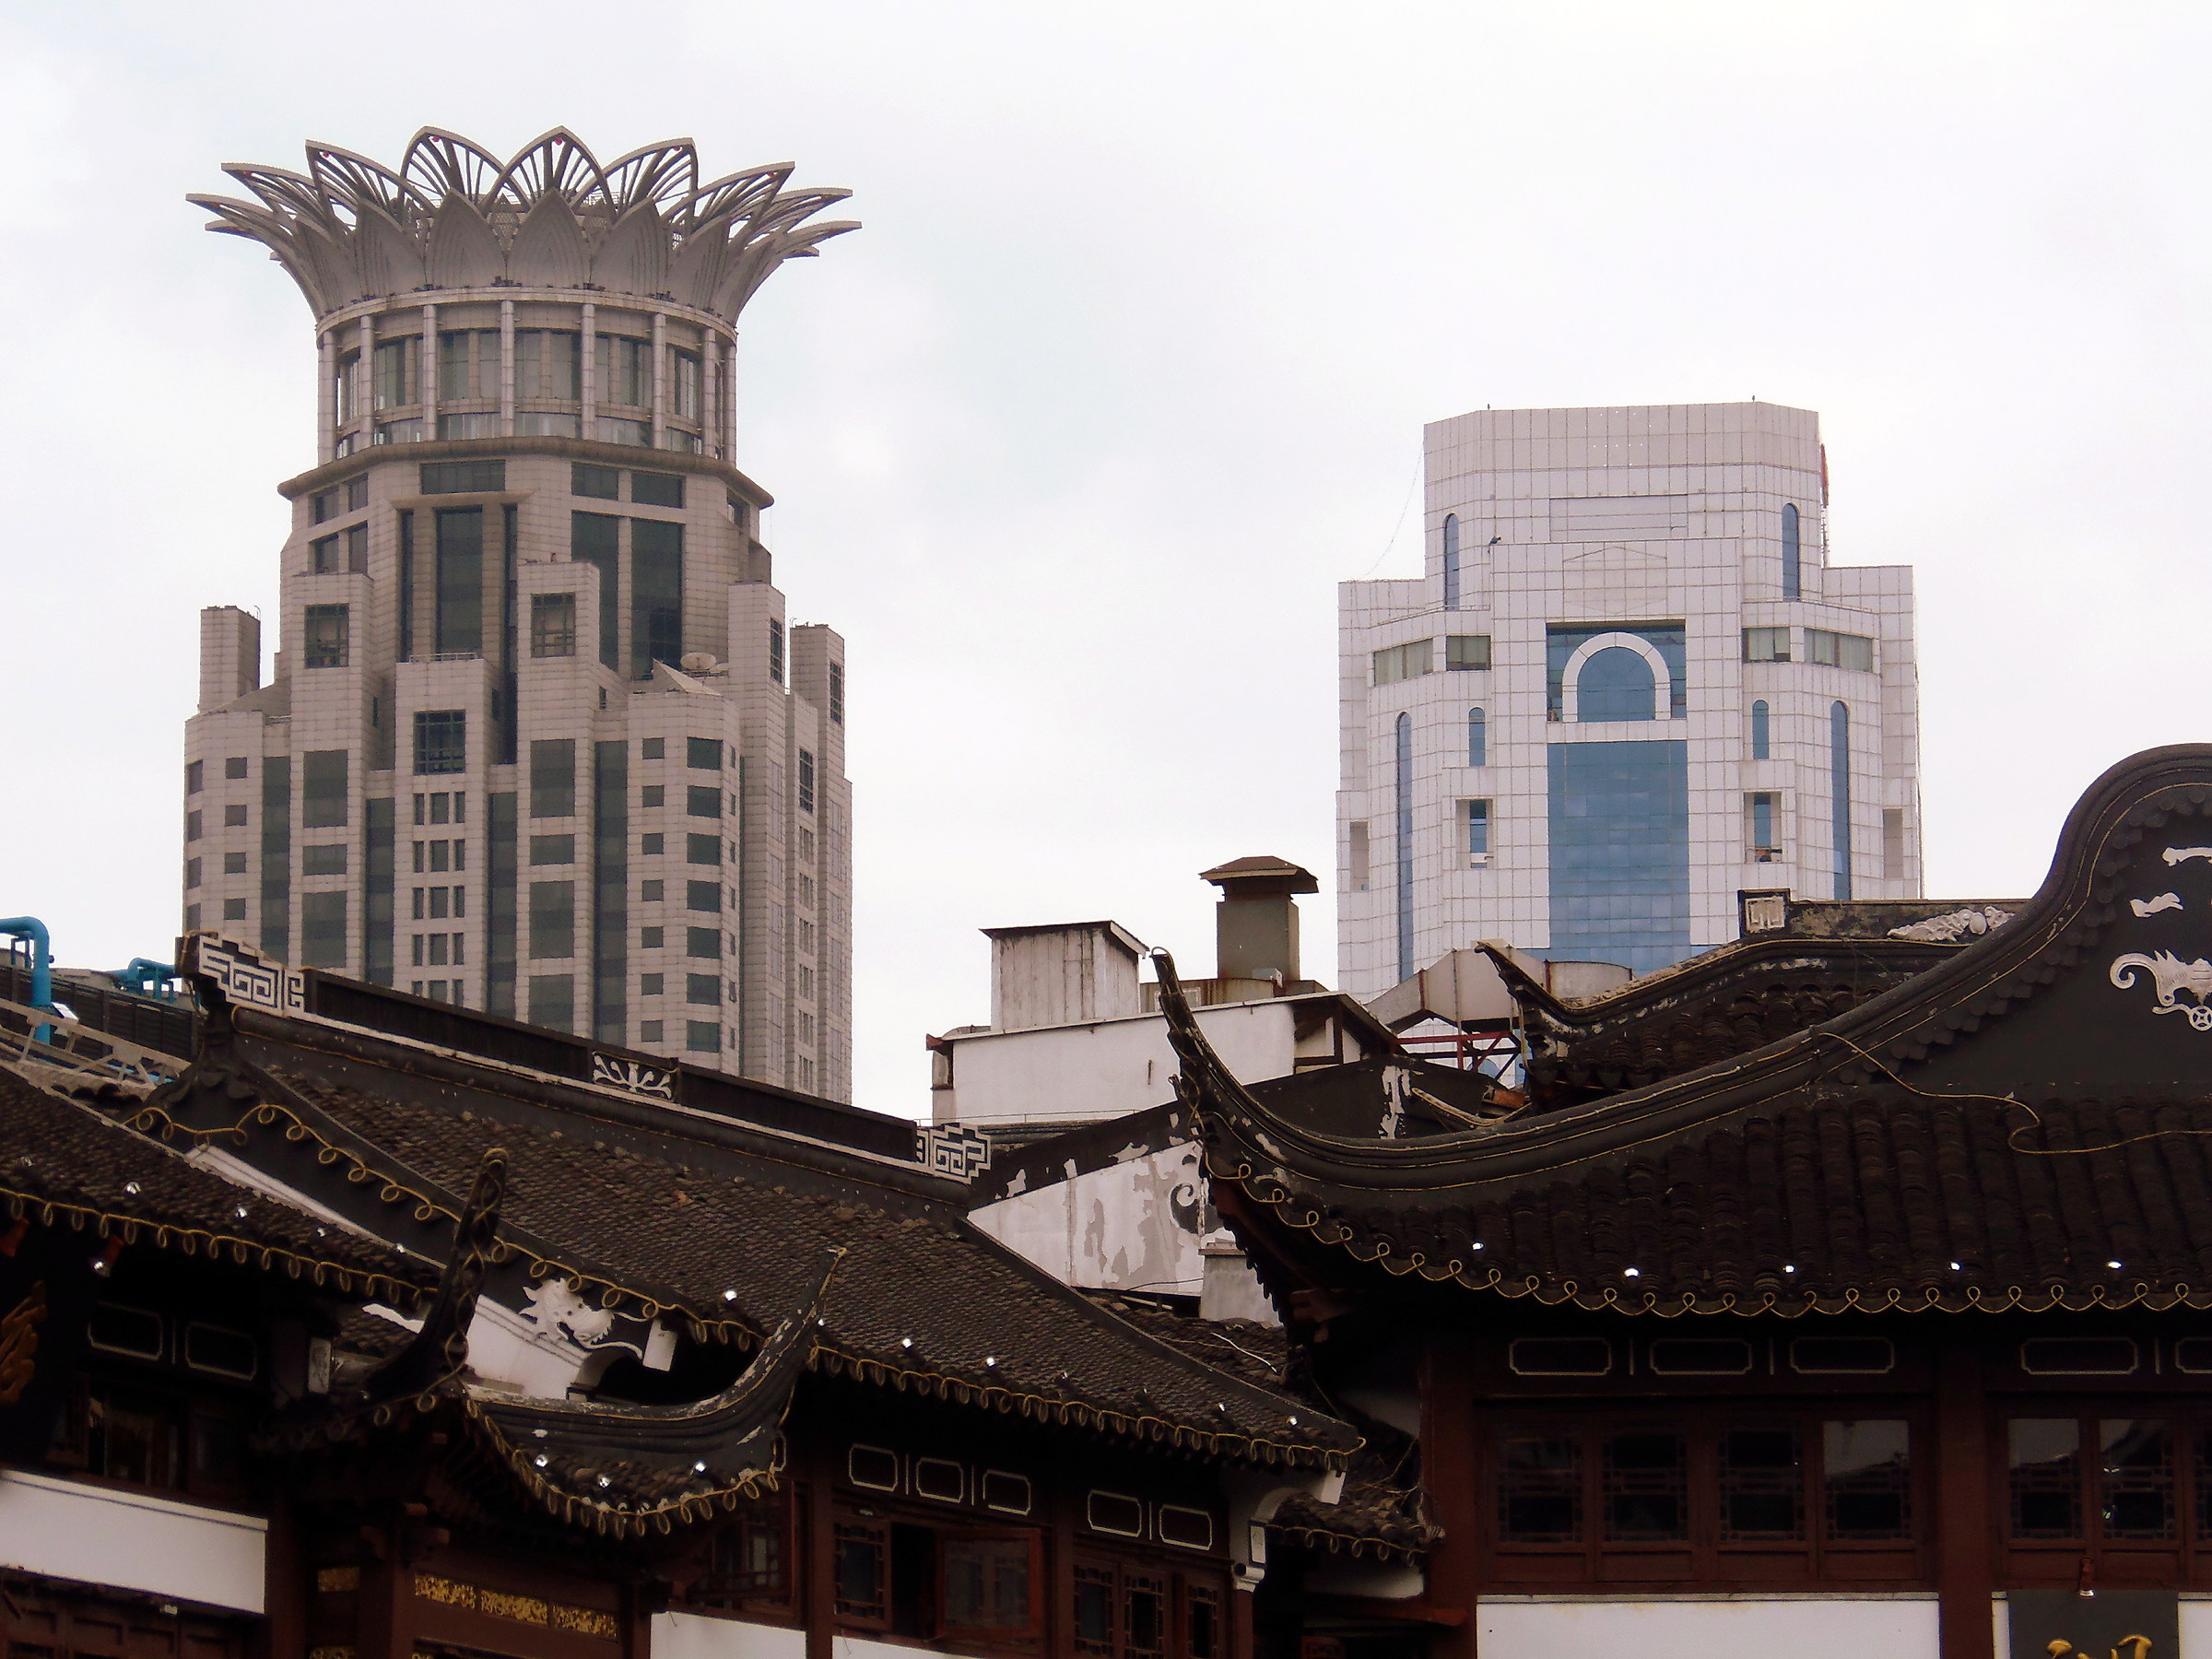 Modern and old in Shanghai...